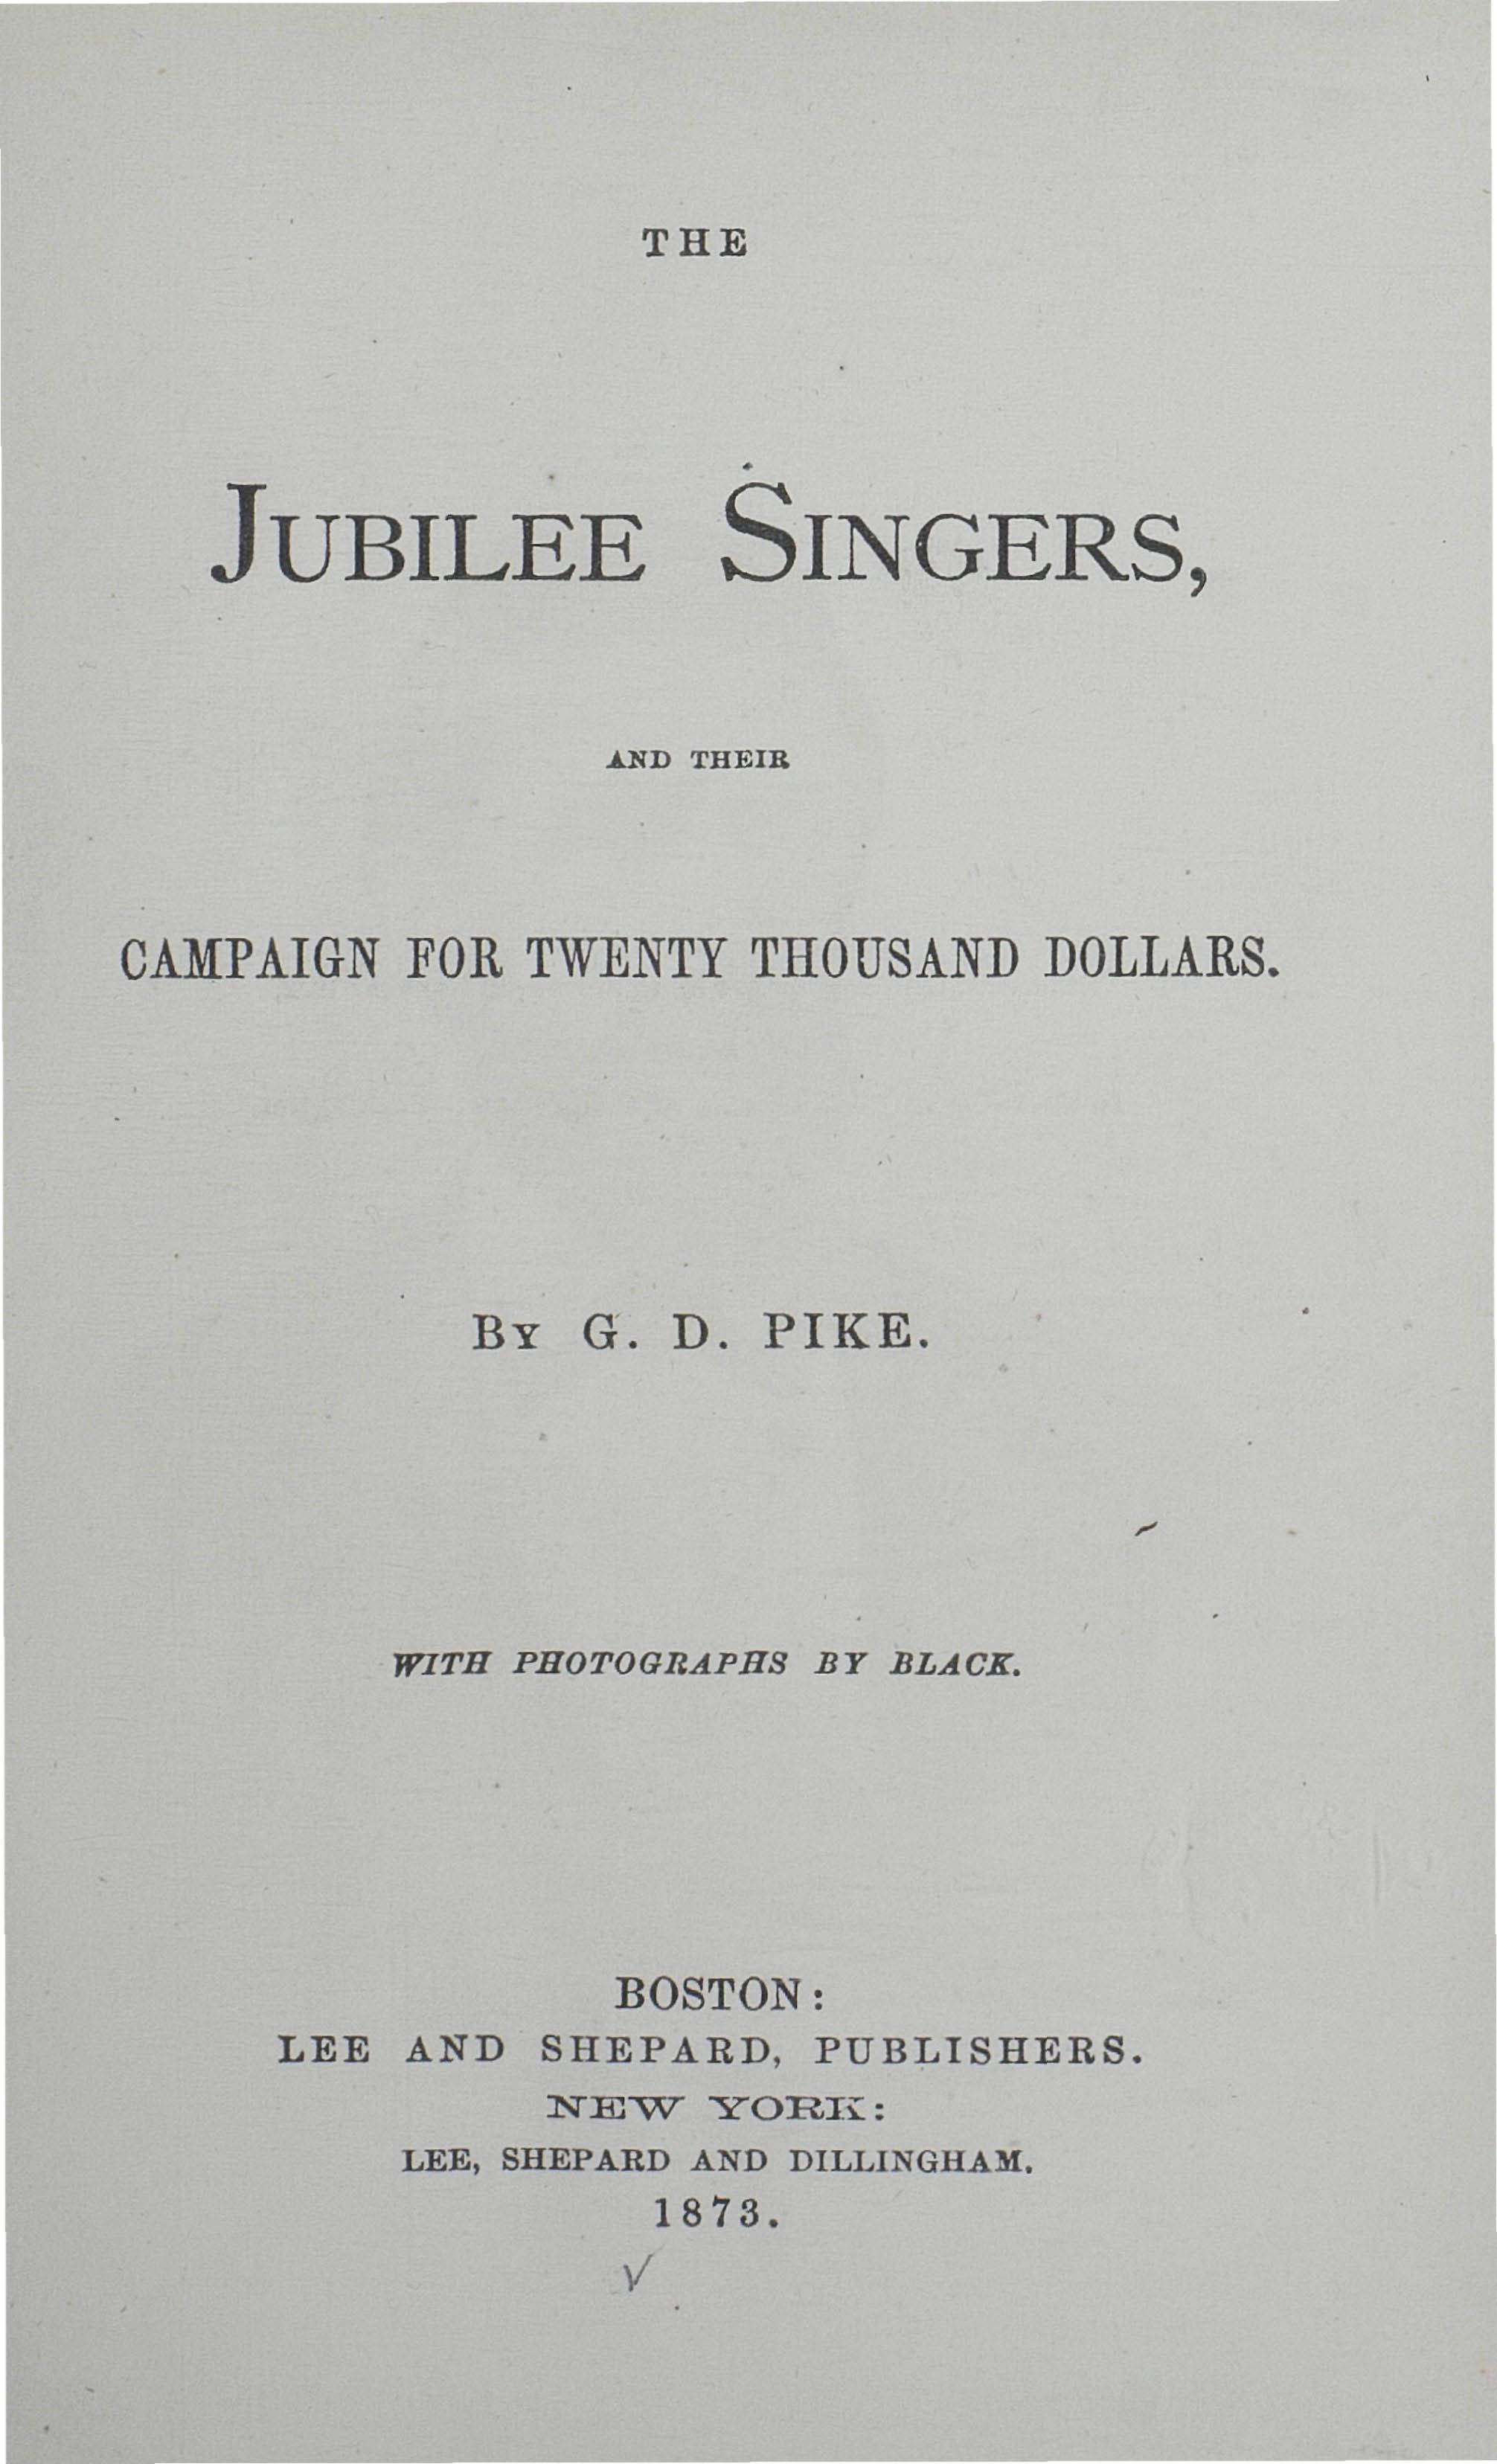 The_jubilee_singers_and_their_campaign_for_twenty__1873.pdf, Afro-American Imprints